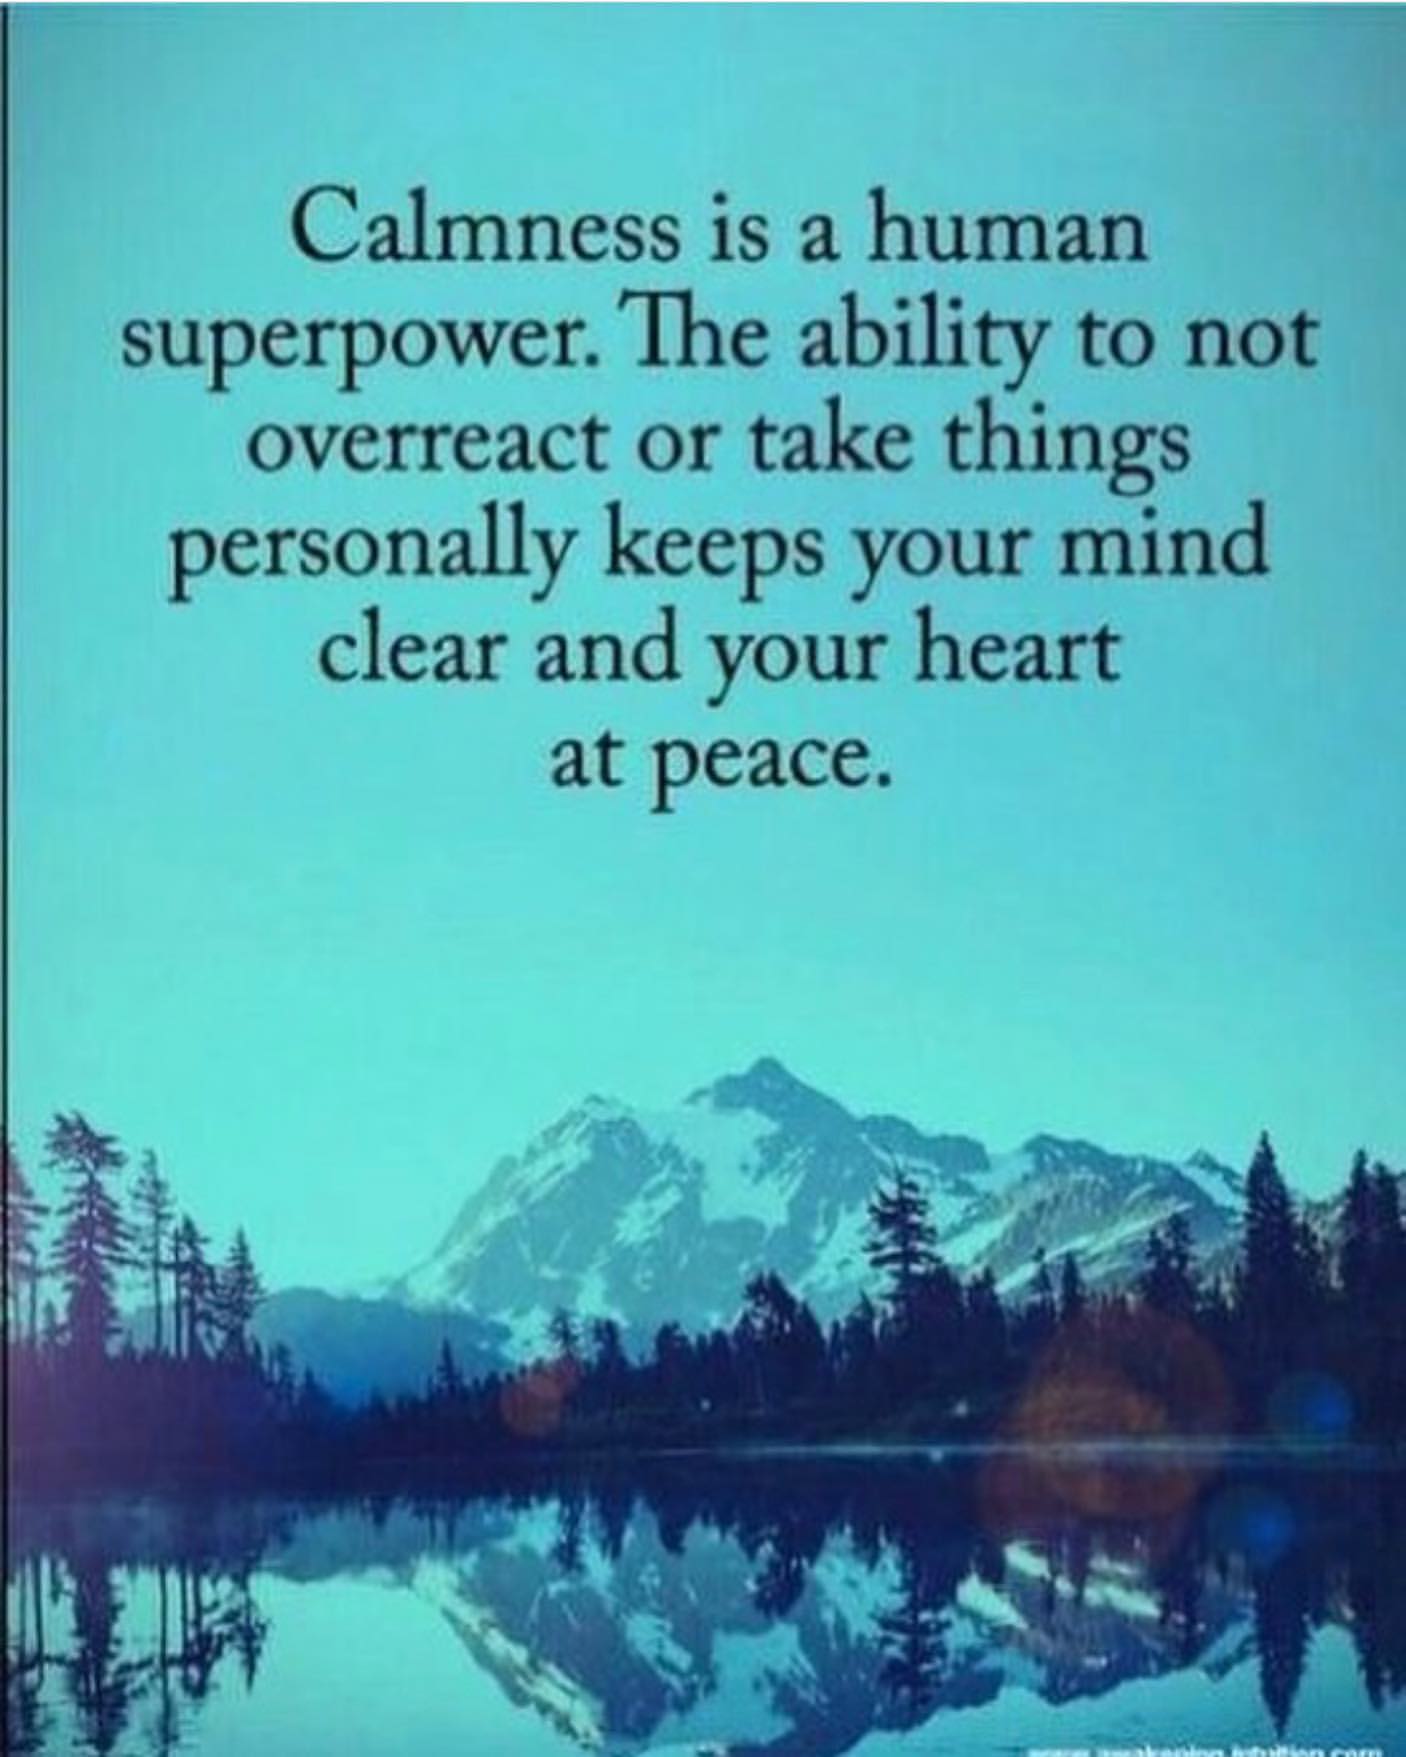 Calmness is a human superpower. The ability to not overreact or take things personally keeps your mind clear and your heart at peace.